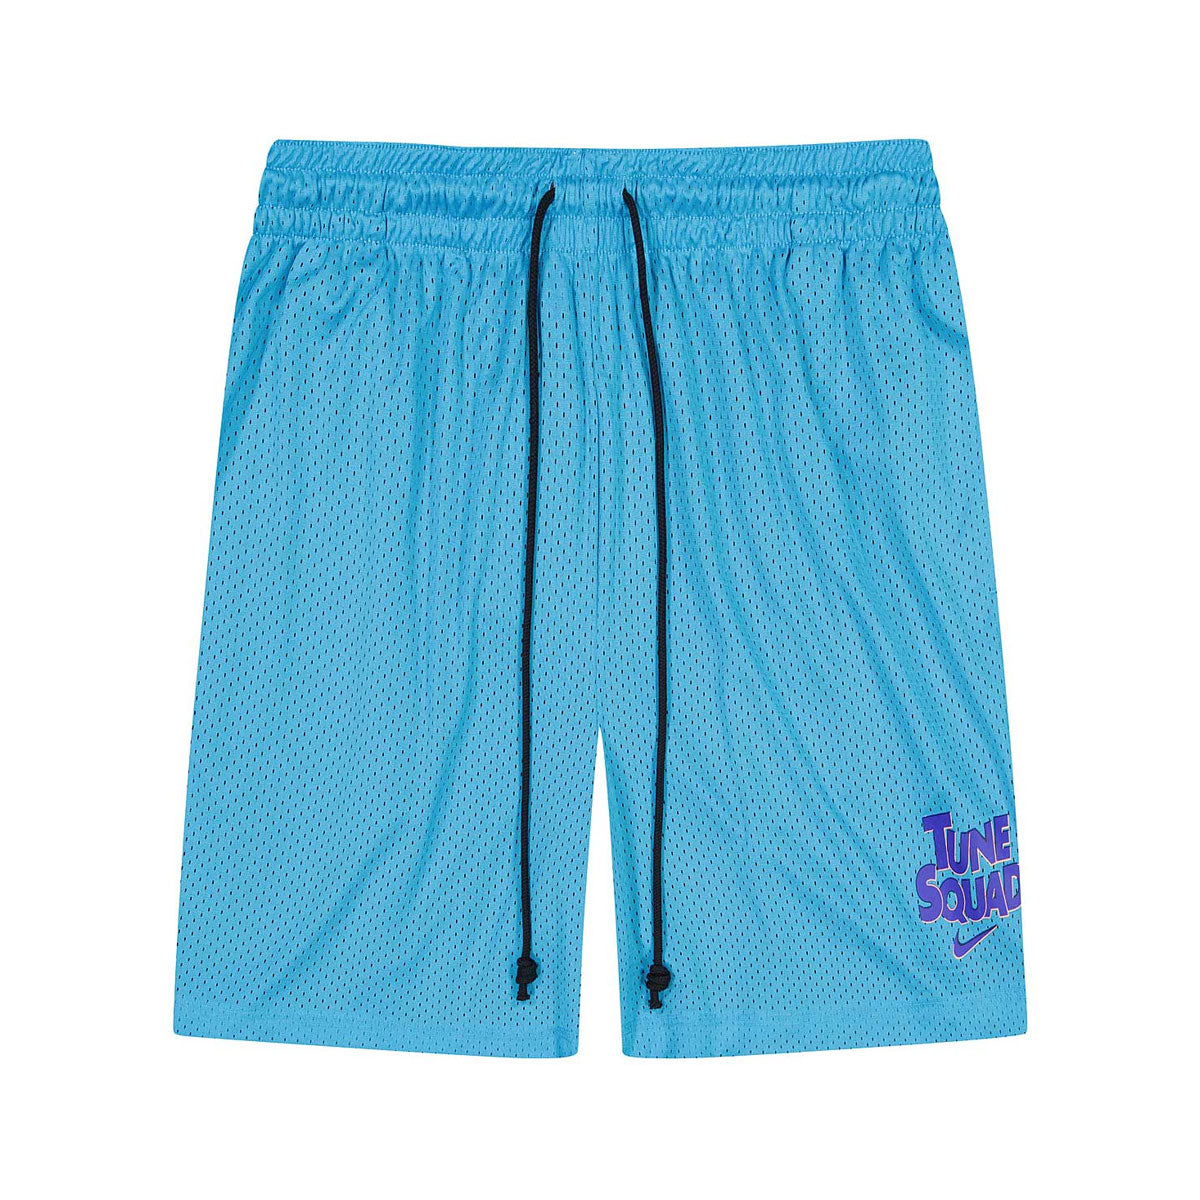 Nike Dri-FIT Standard Issue x Space Jam Reversible Shorts